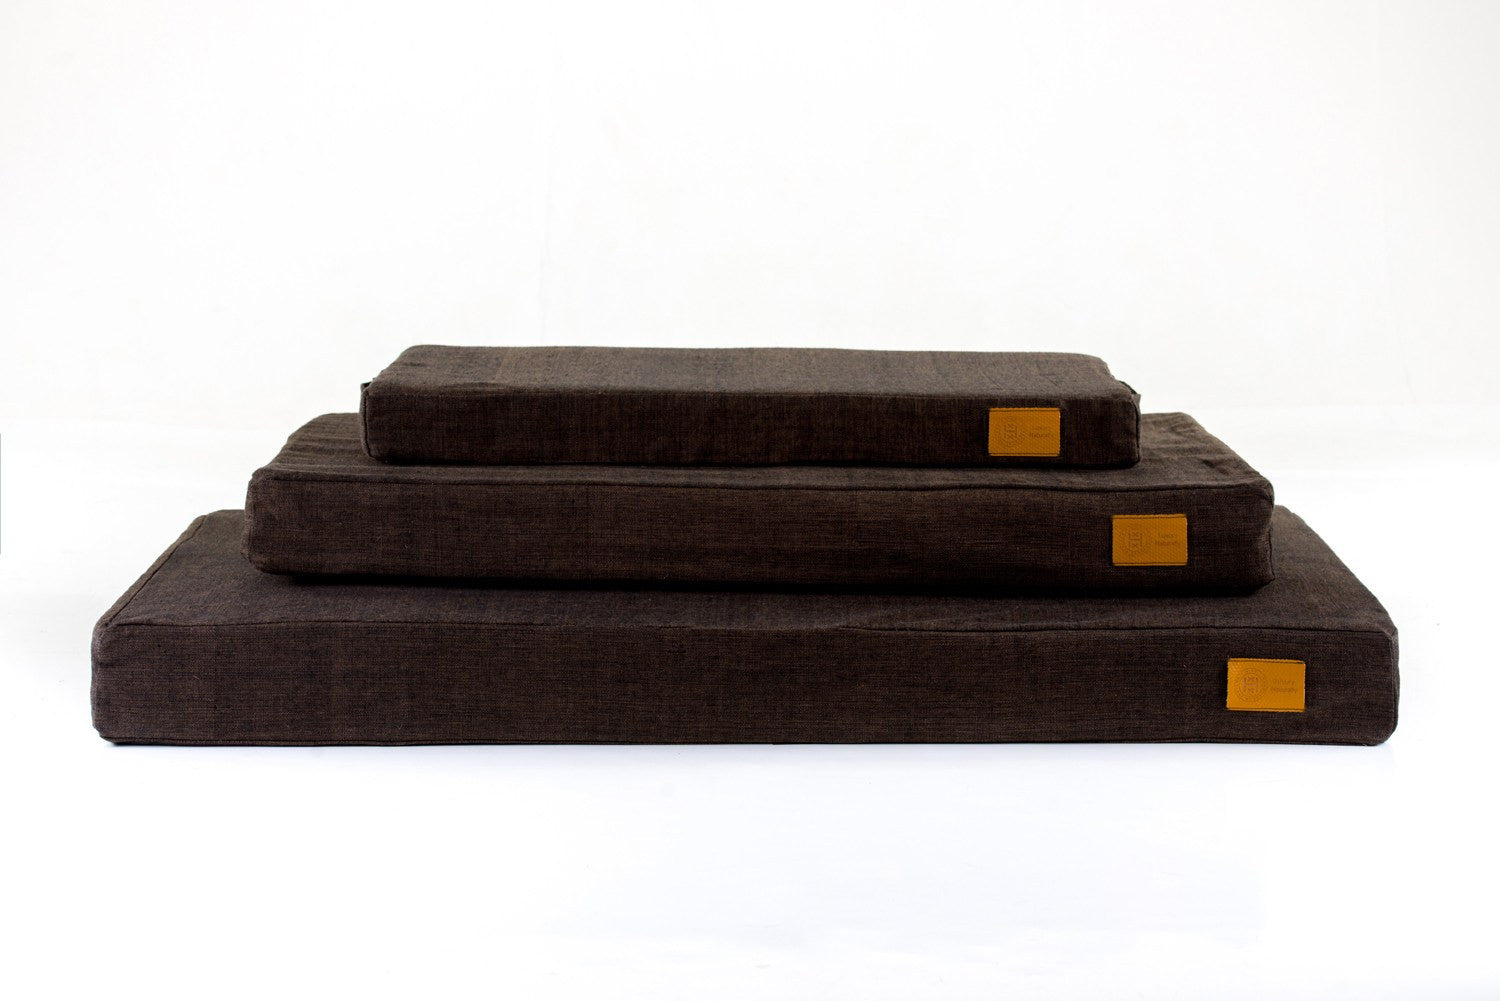 Wild Rover natural dog bed in brown Organic Cotton. Made in Britain with organic materials